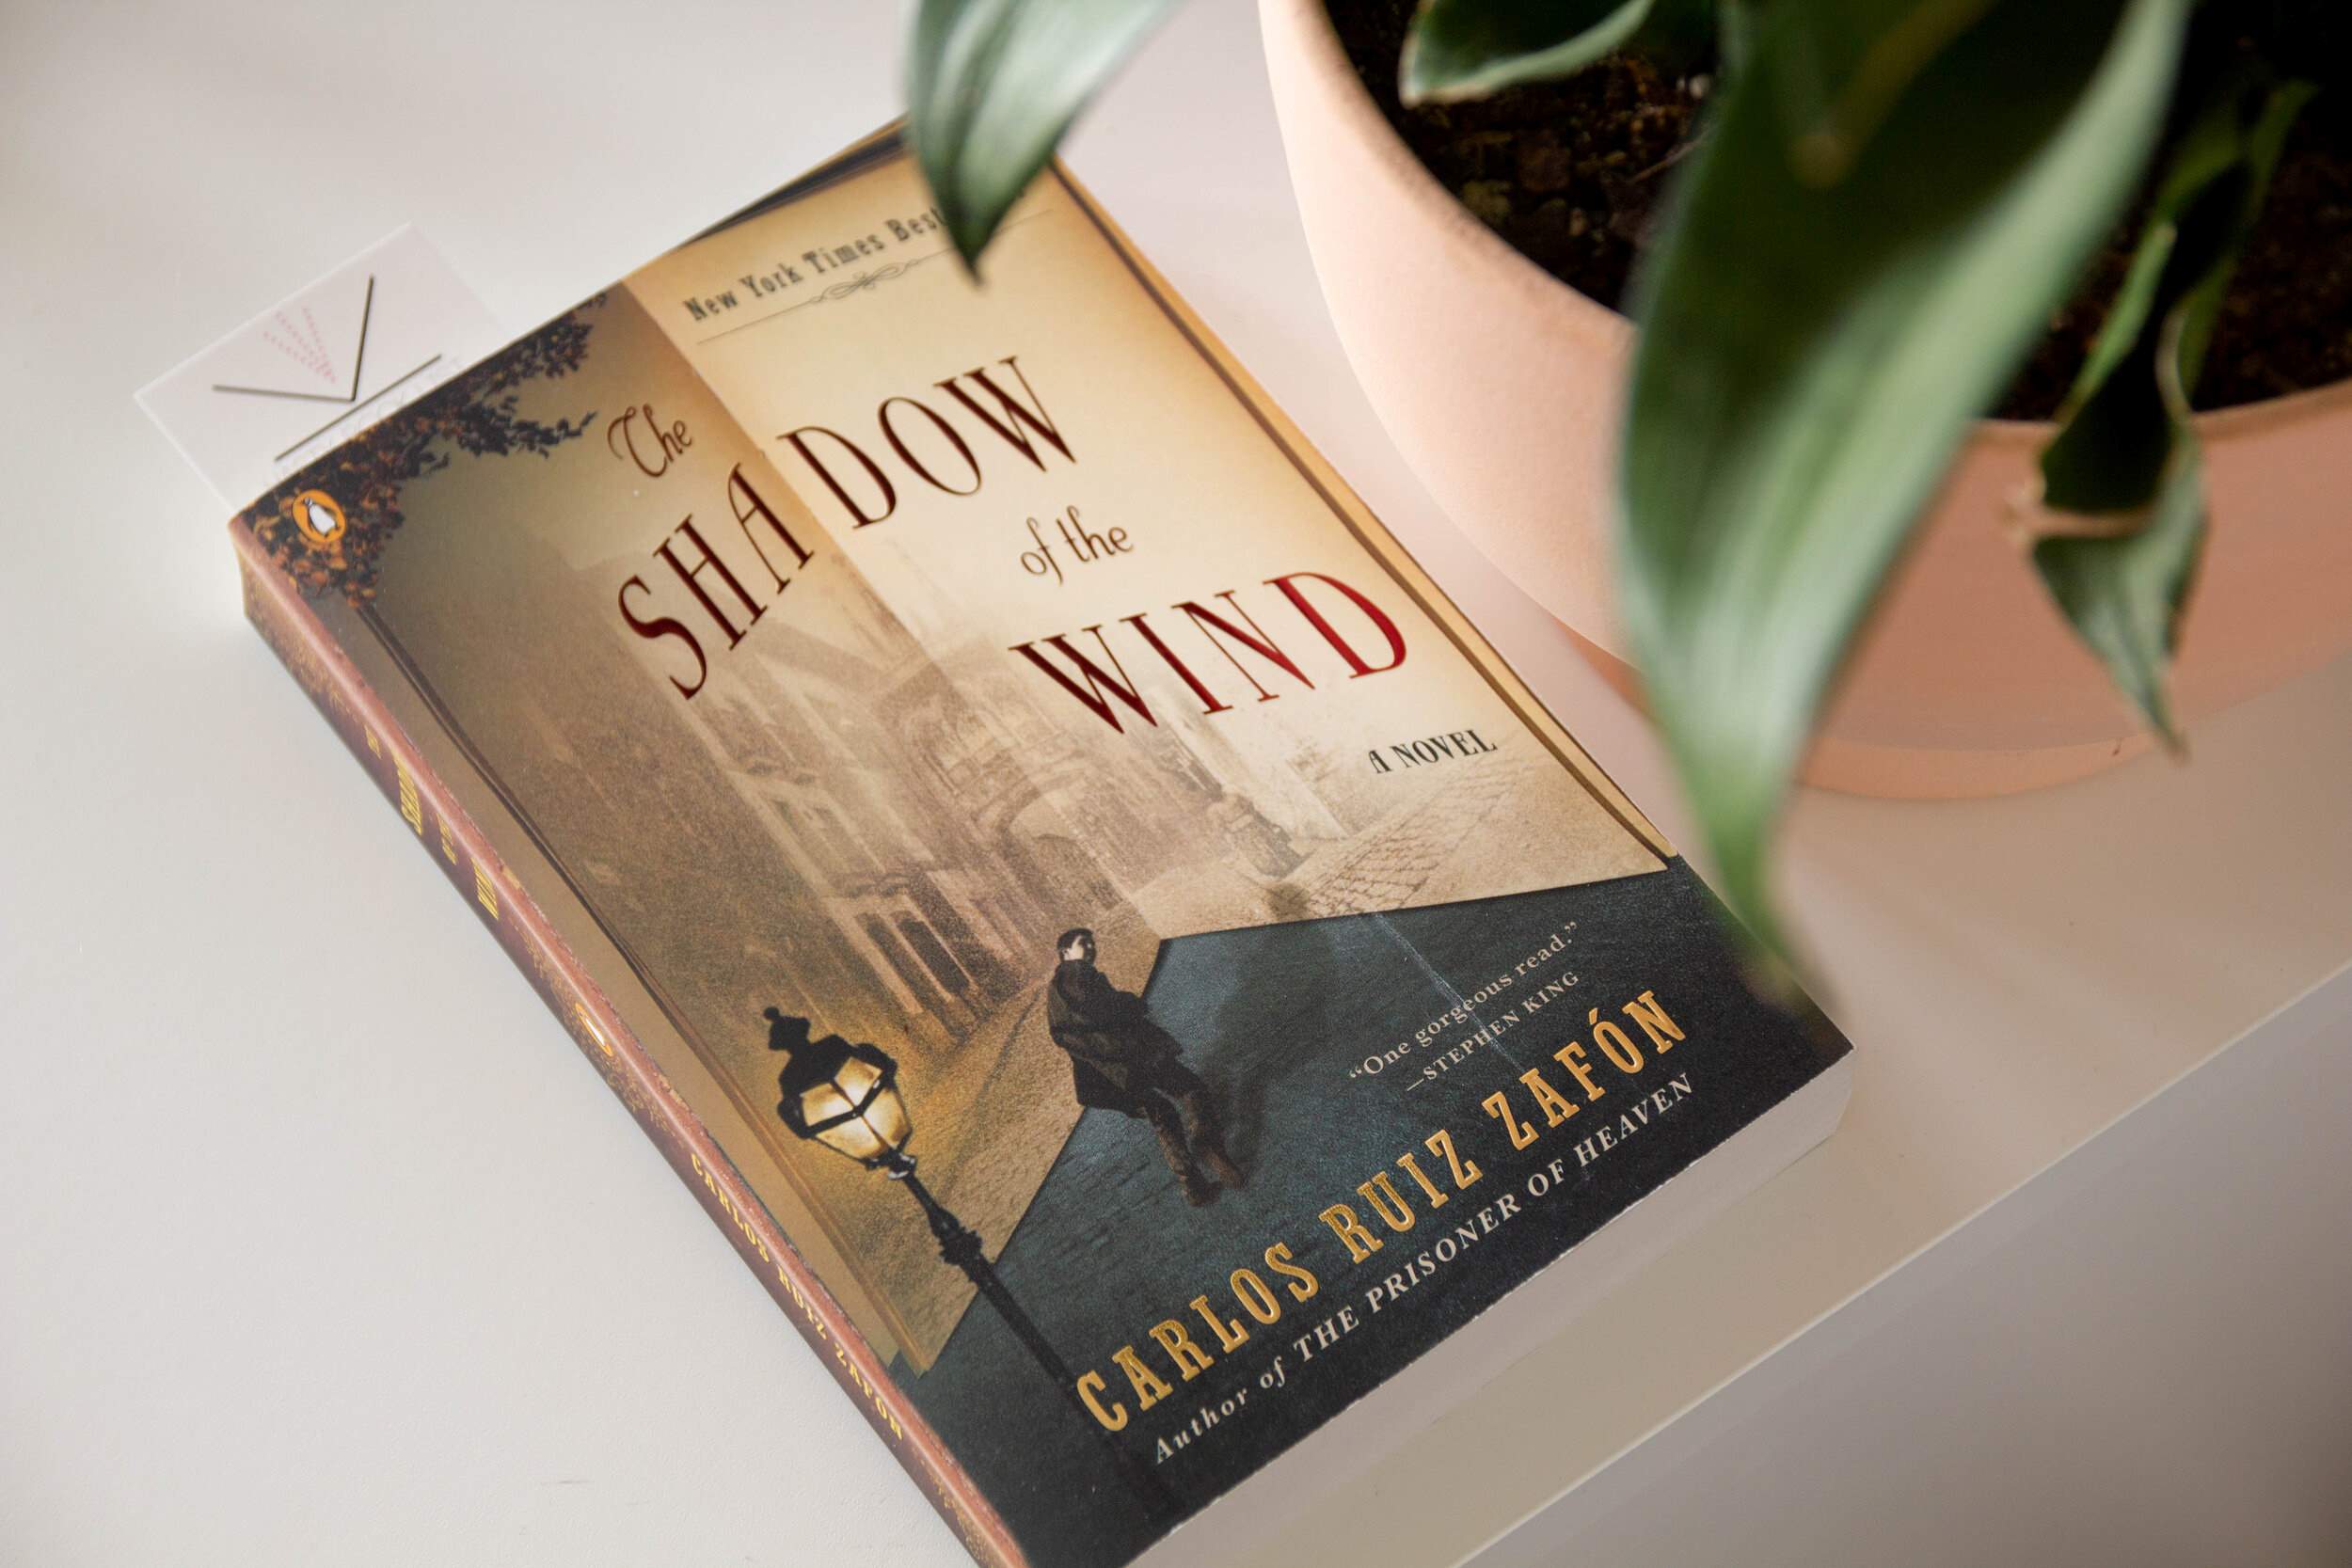 16-extraordinary-facts-about-the-shadow-of-the-wind-carlos-ruiz-zafon